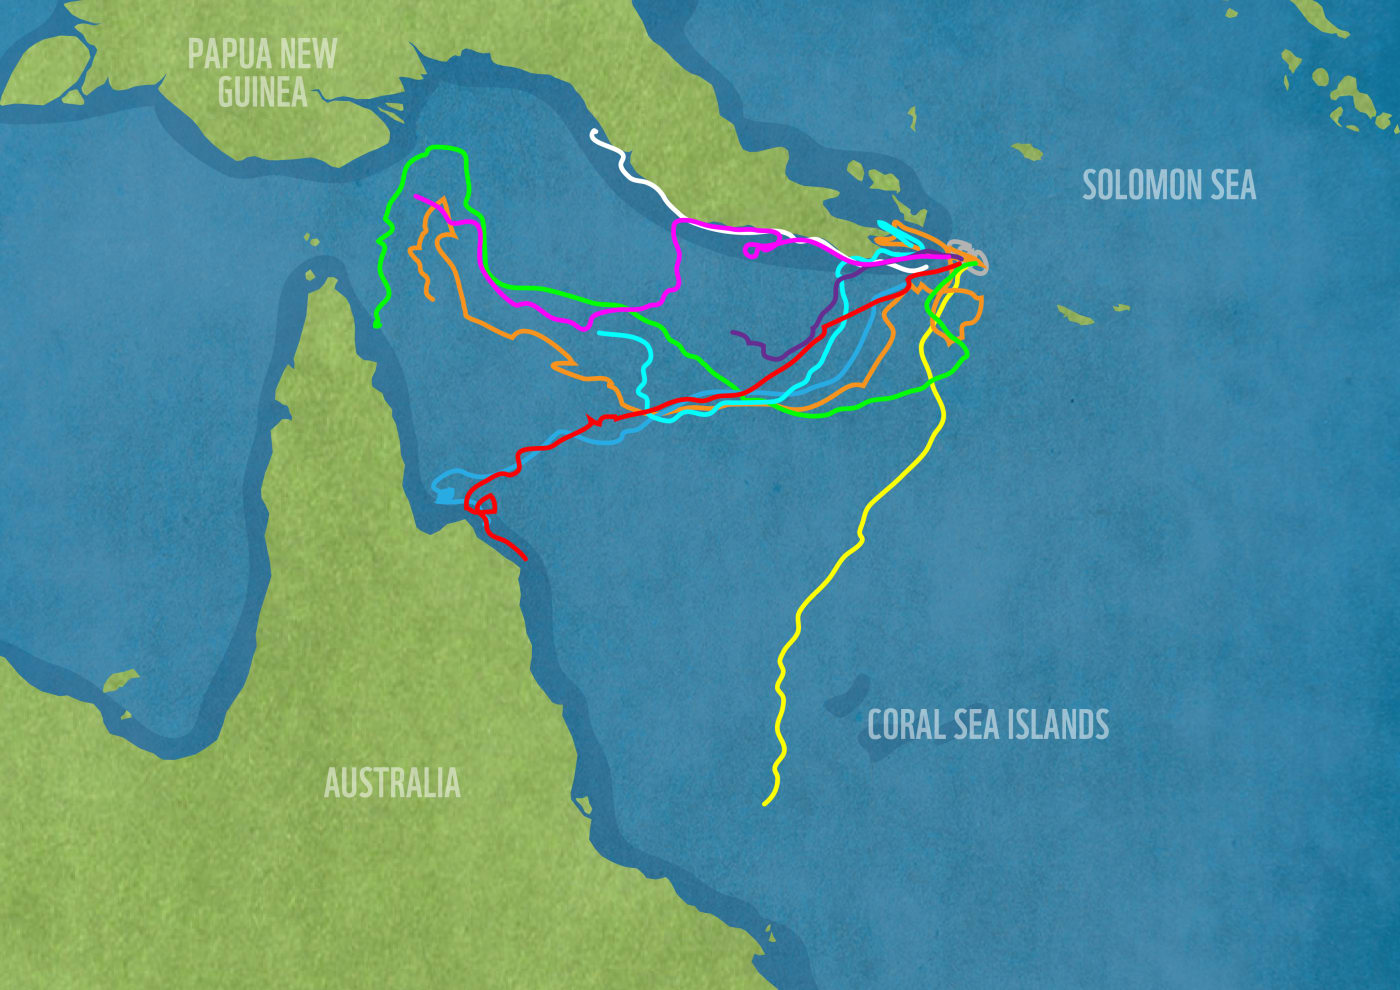 Hawksbill Highway from Papua New Guinea through the Coral Sea to the Great Barrier Reef